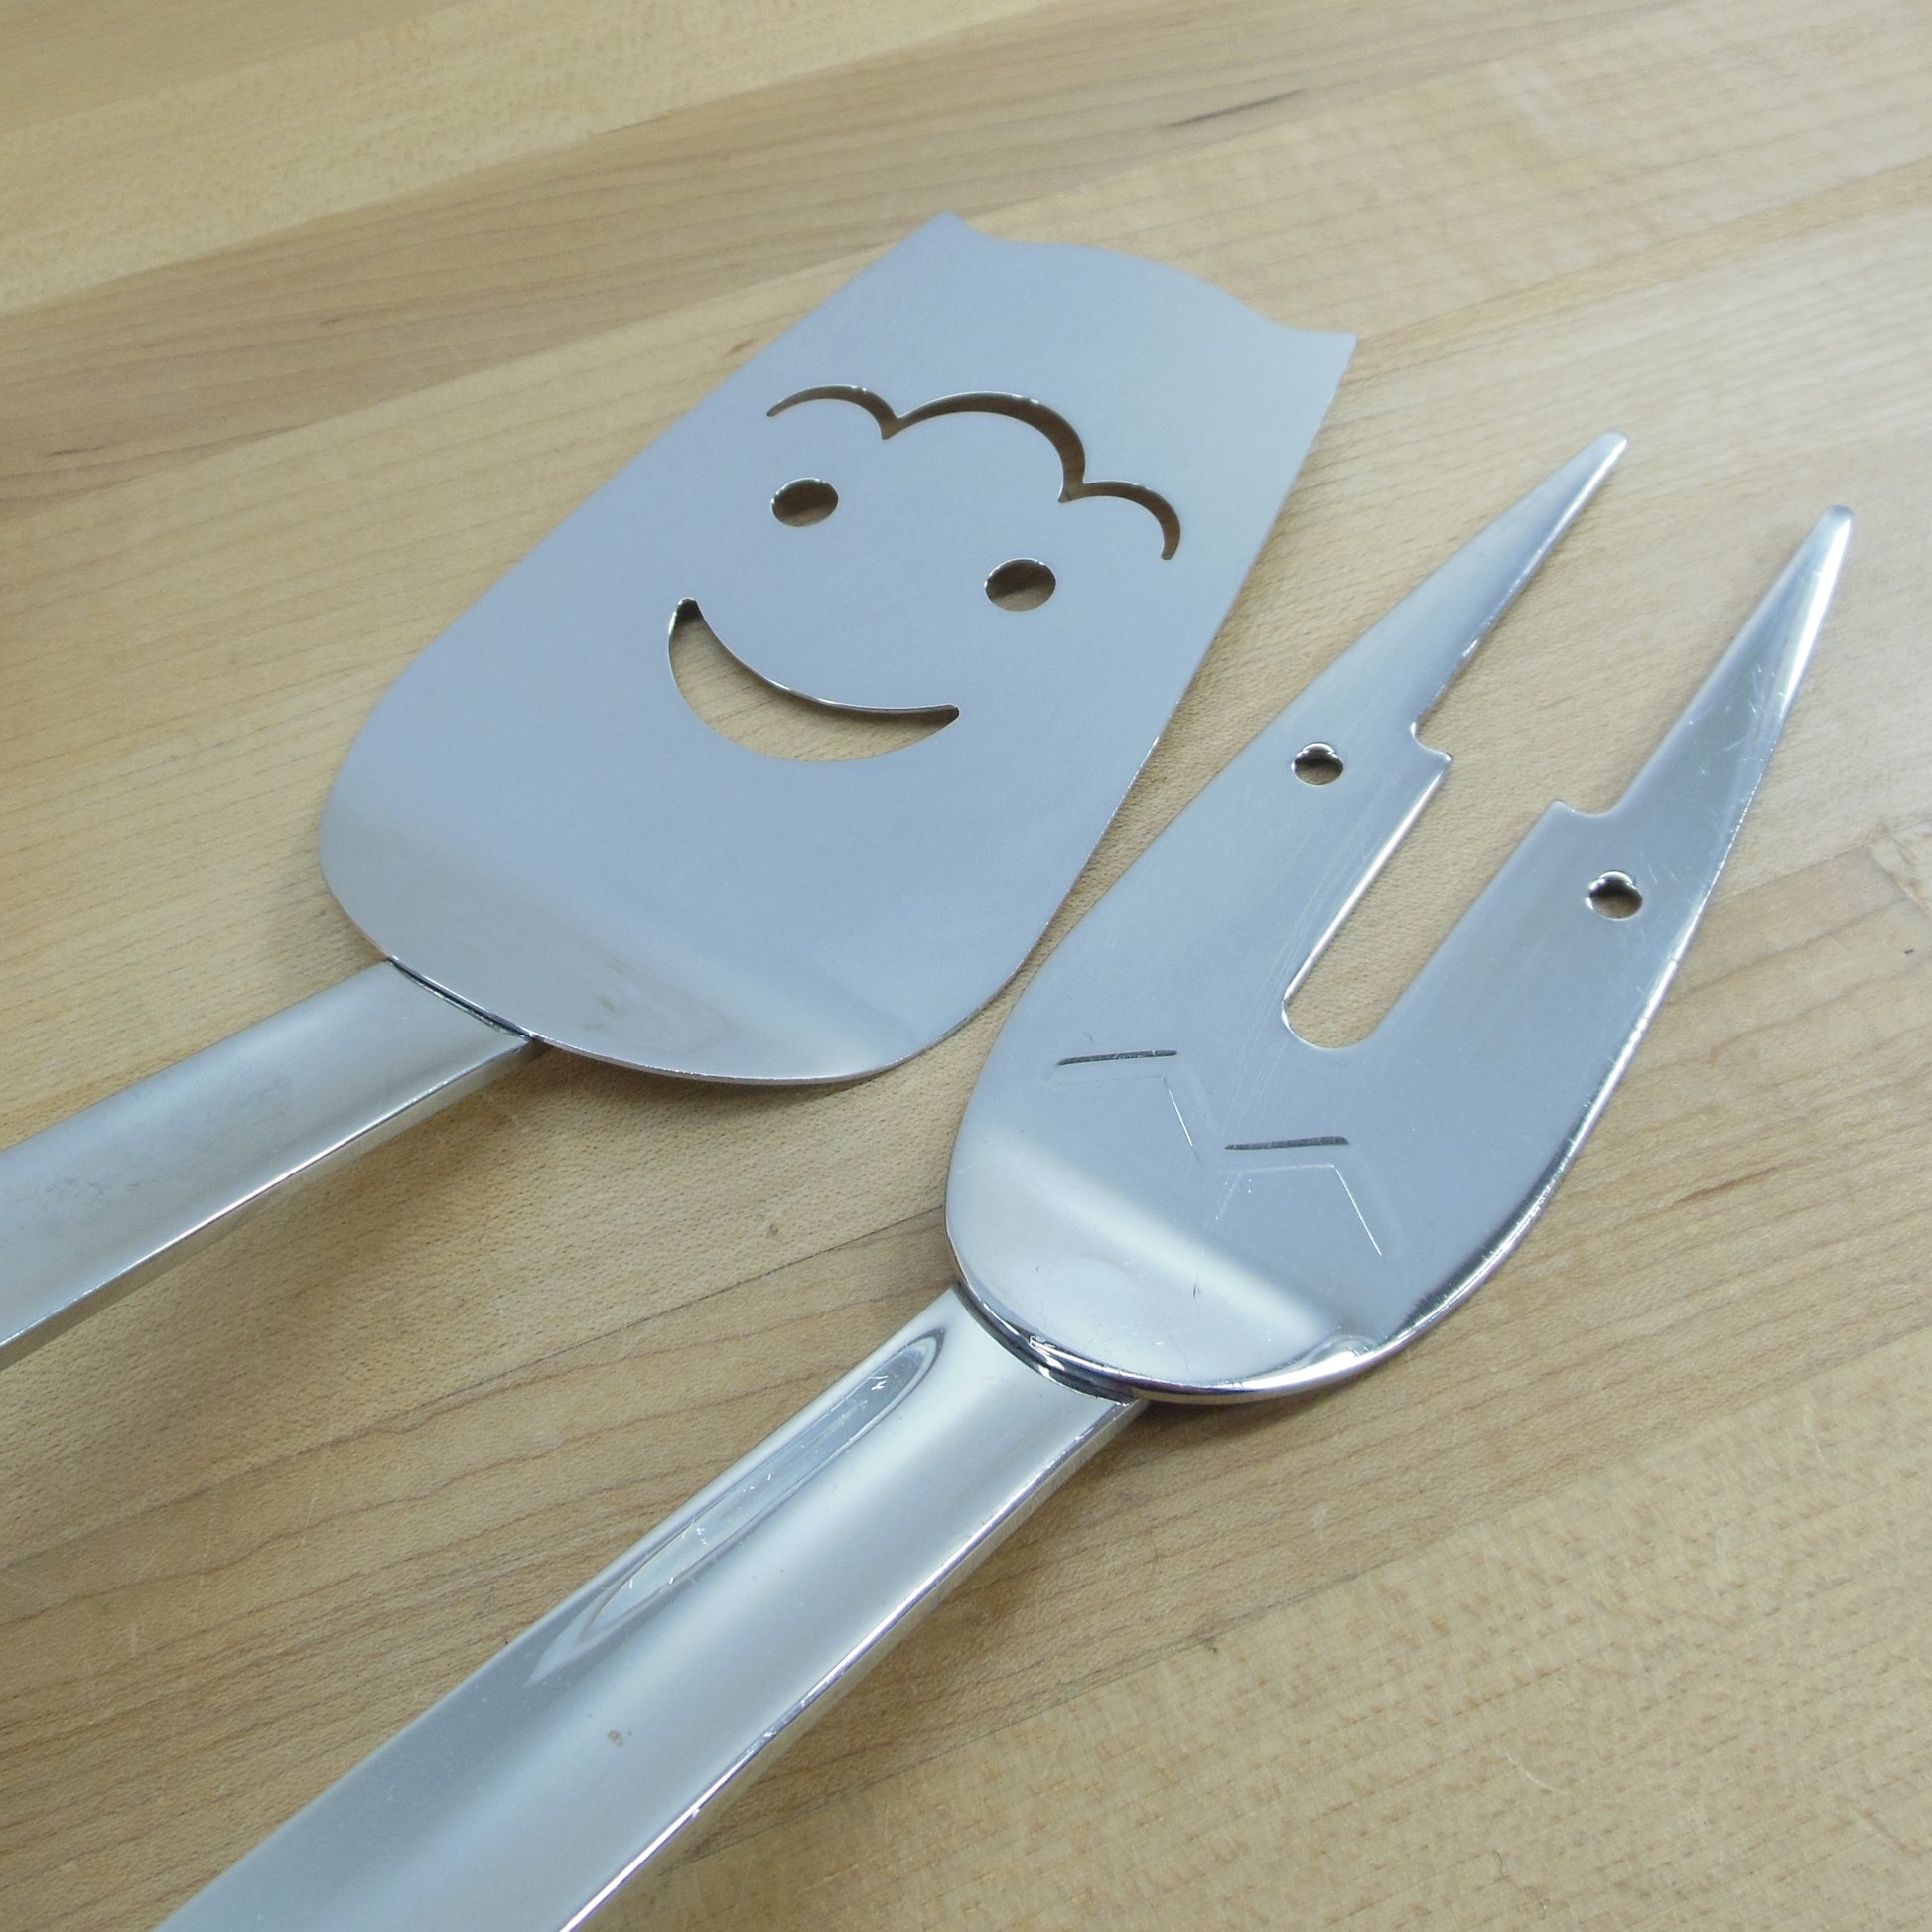 WMF Stainless BBQ Grilling Spatula Fork Faces Smiling Frowning